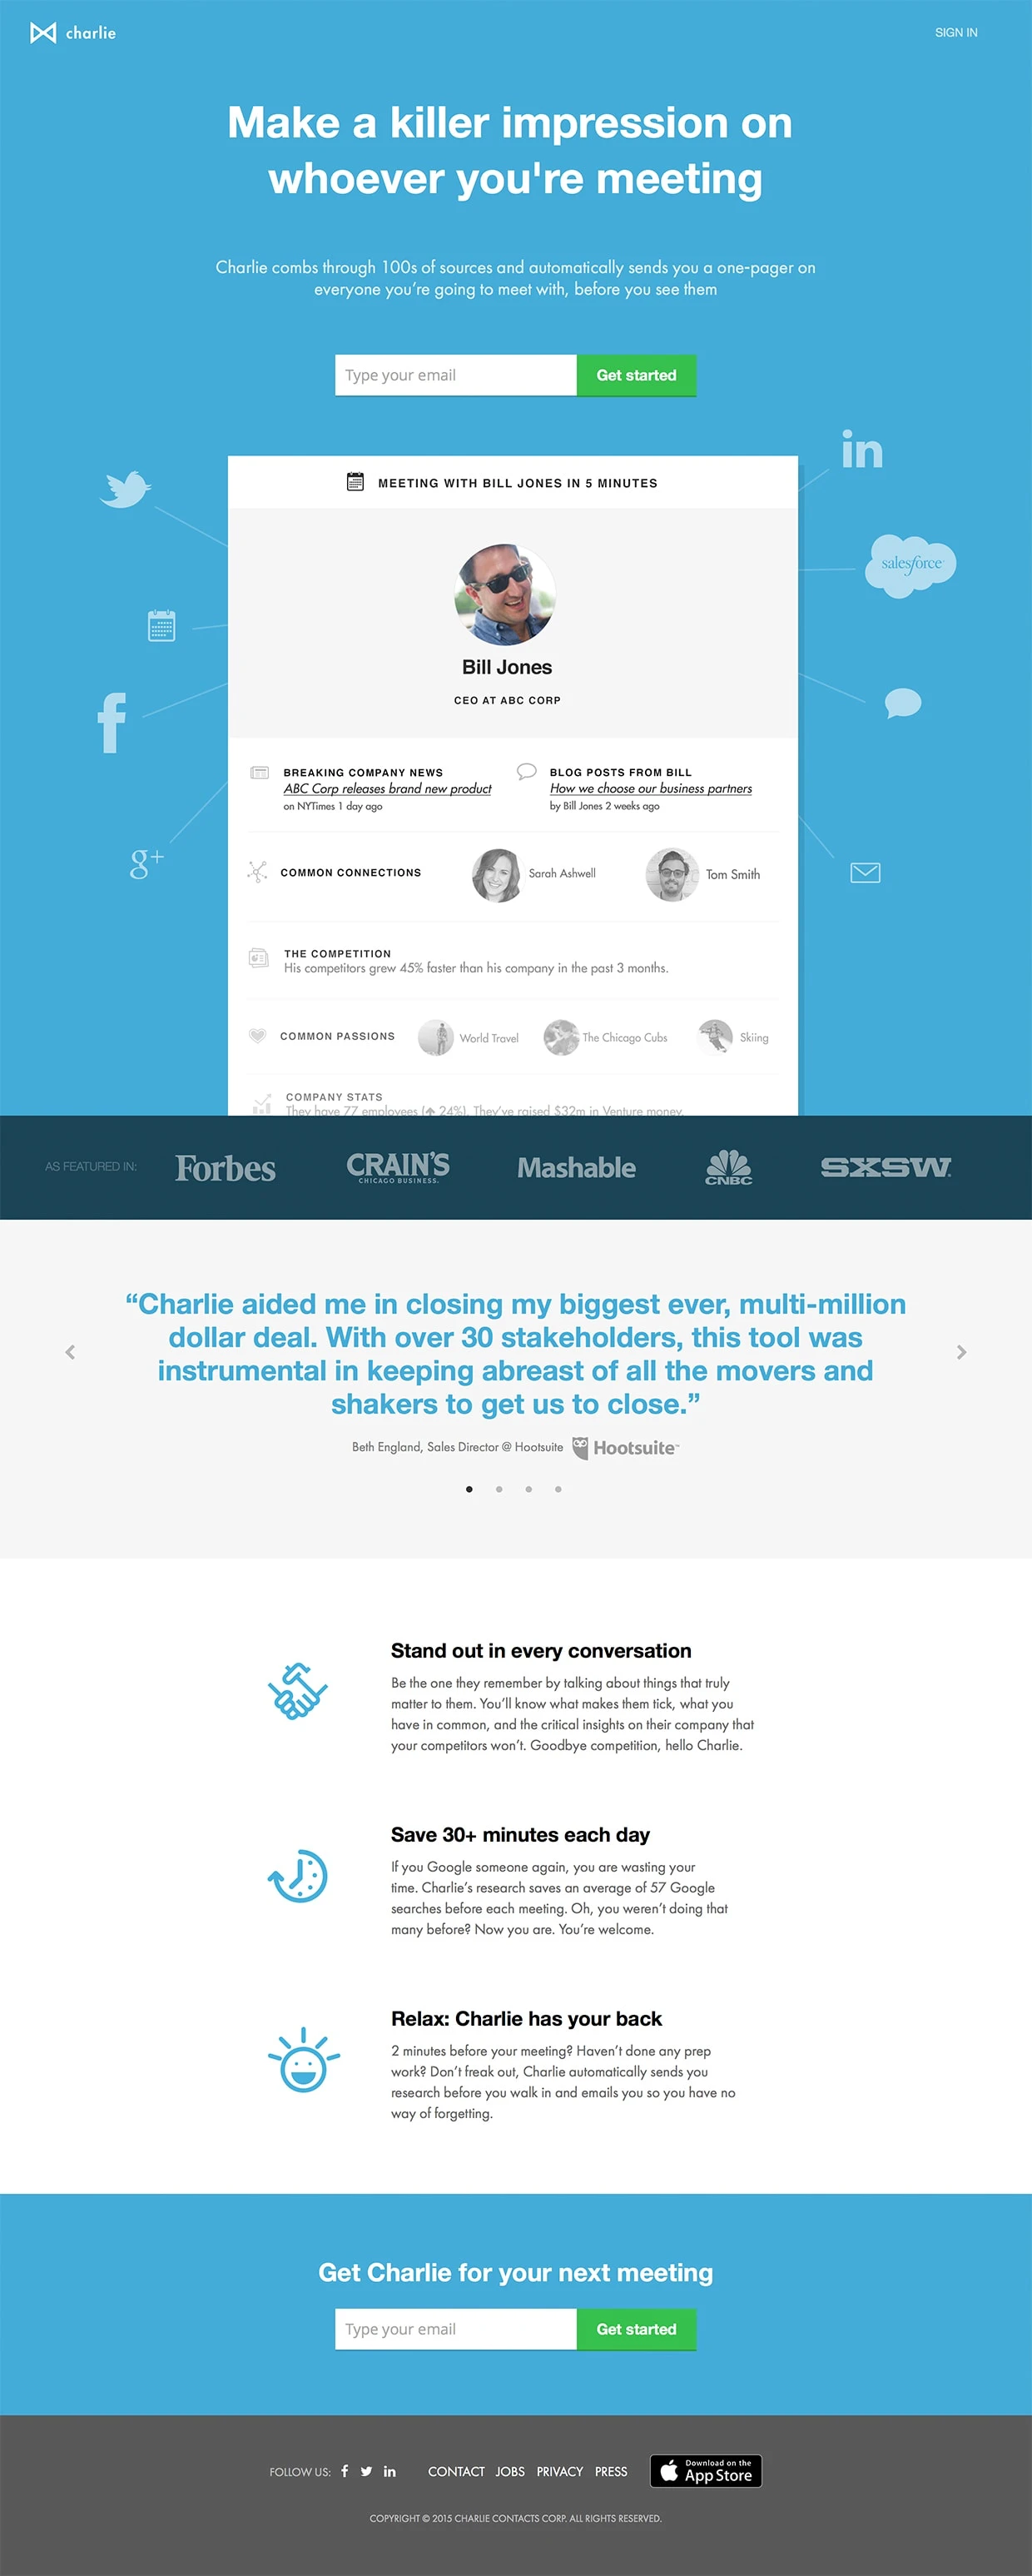 Charlie App Landing Page Example: Charlie combs through 100s of sources and automatically sends you a one-pager on everyone you're going to meet with, before you see them